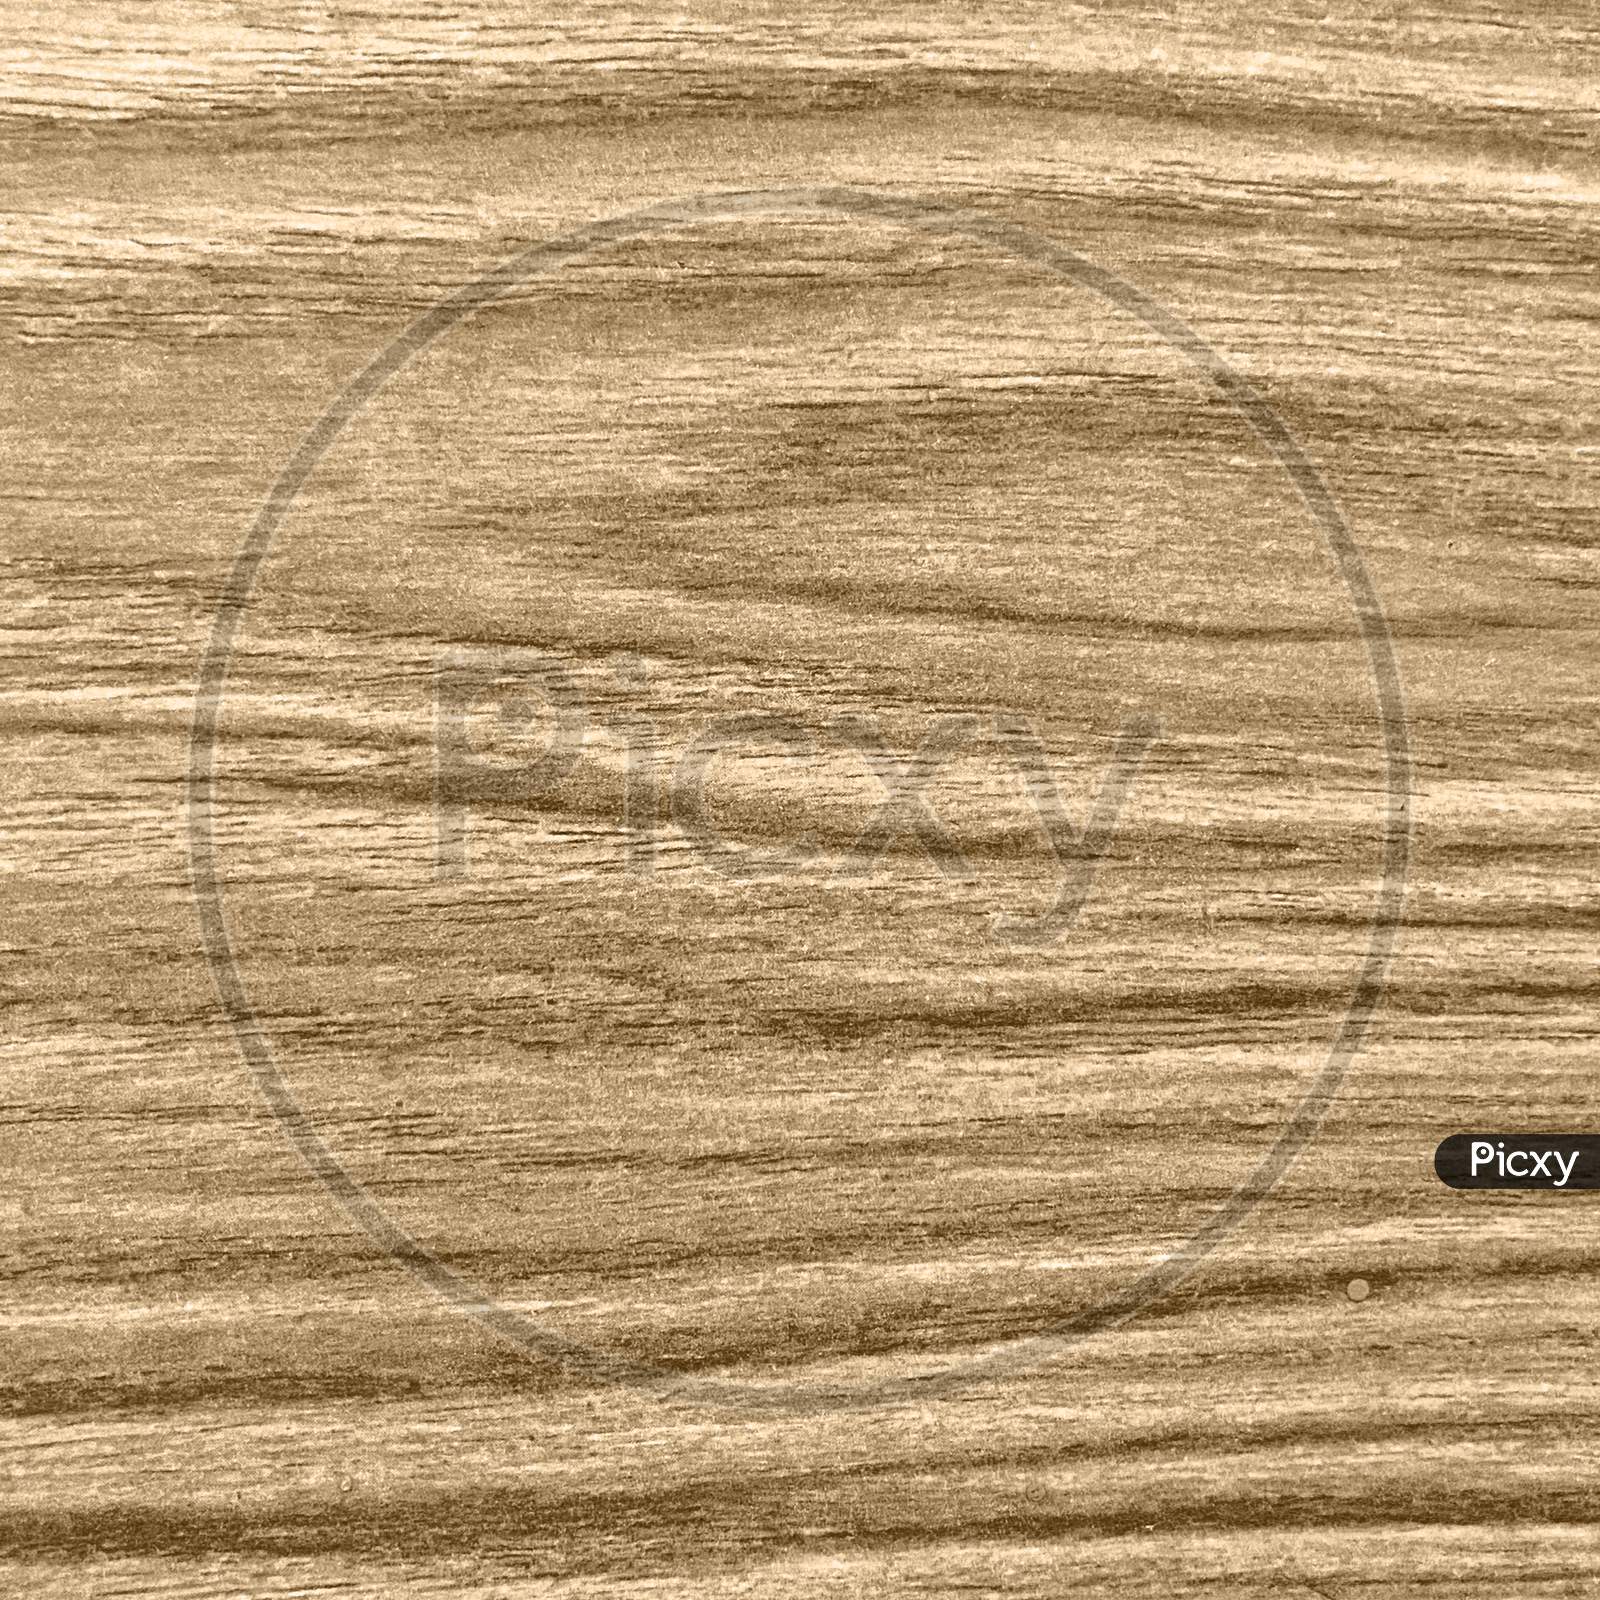 Abstract wooden texture background, beautiful wood surface